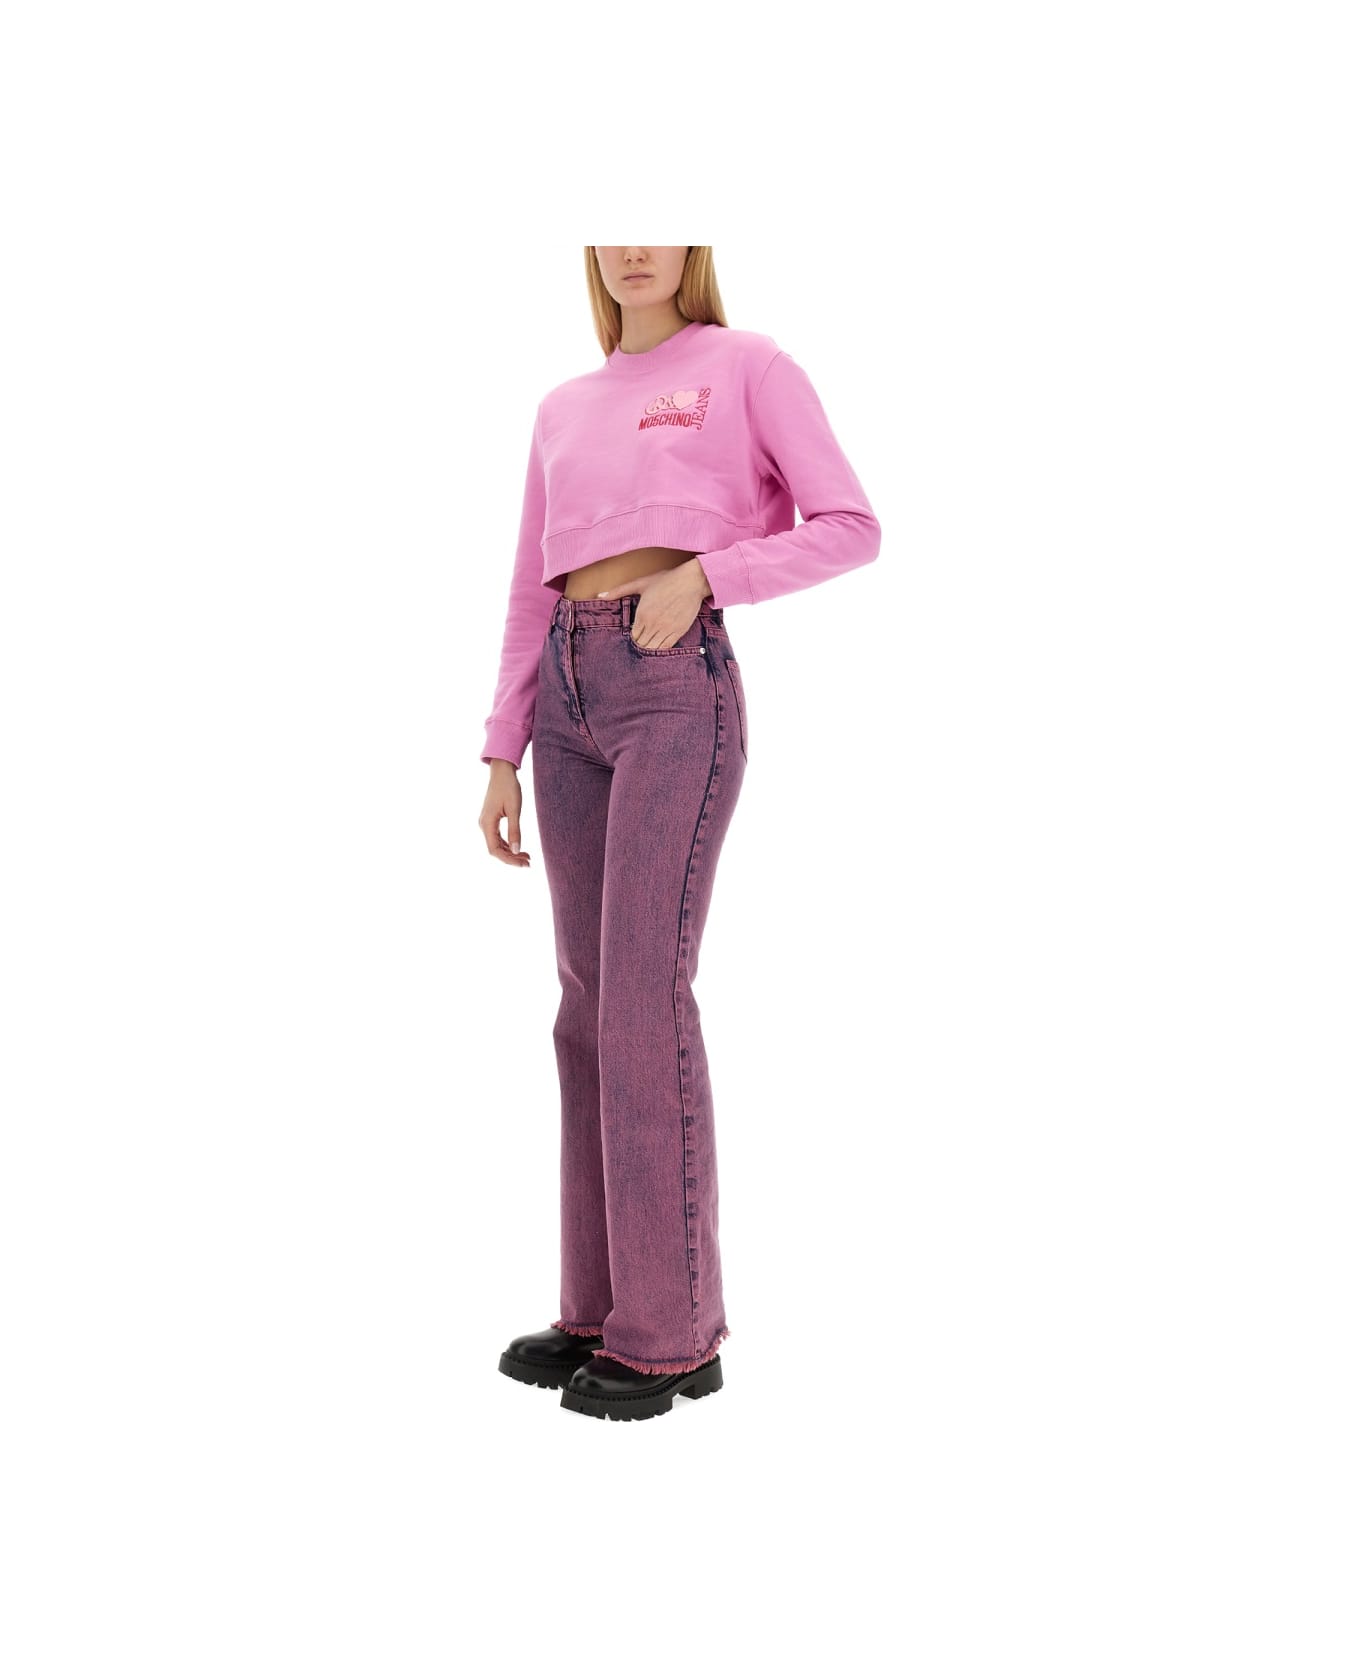 M05CH1N0 Jeans Flare Pant - PINK